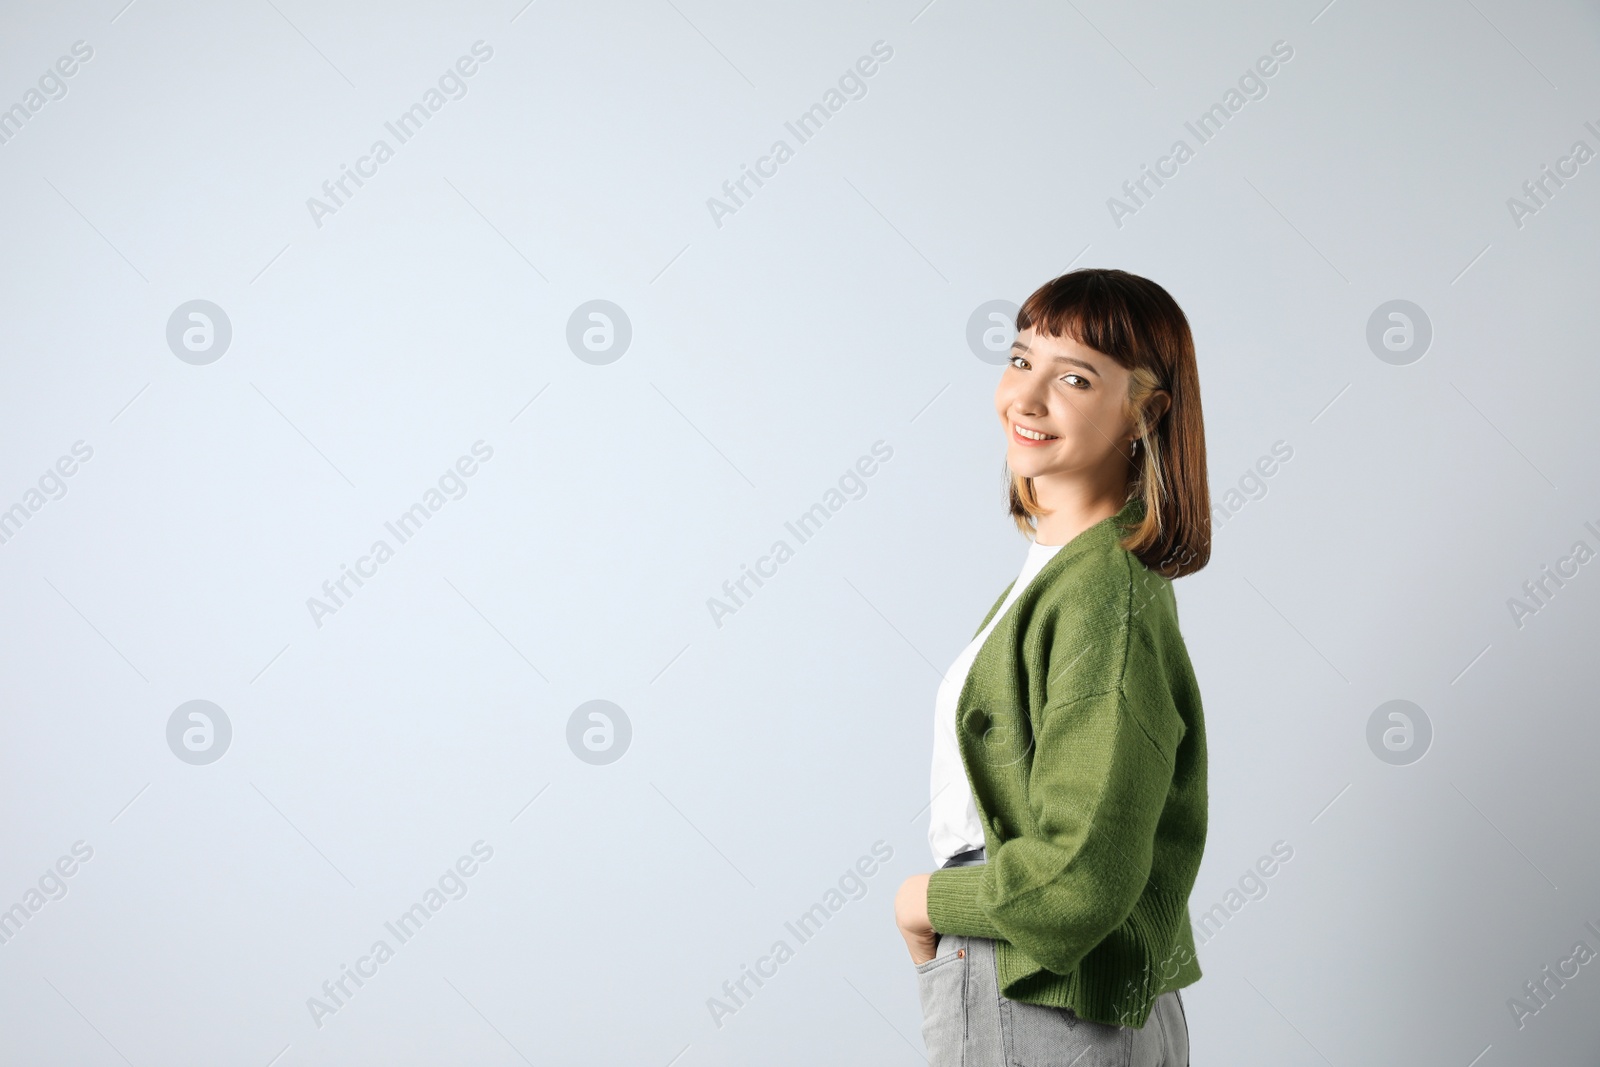 Photo of Beautiful young girl smiling on white background. Space for text